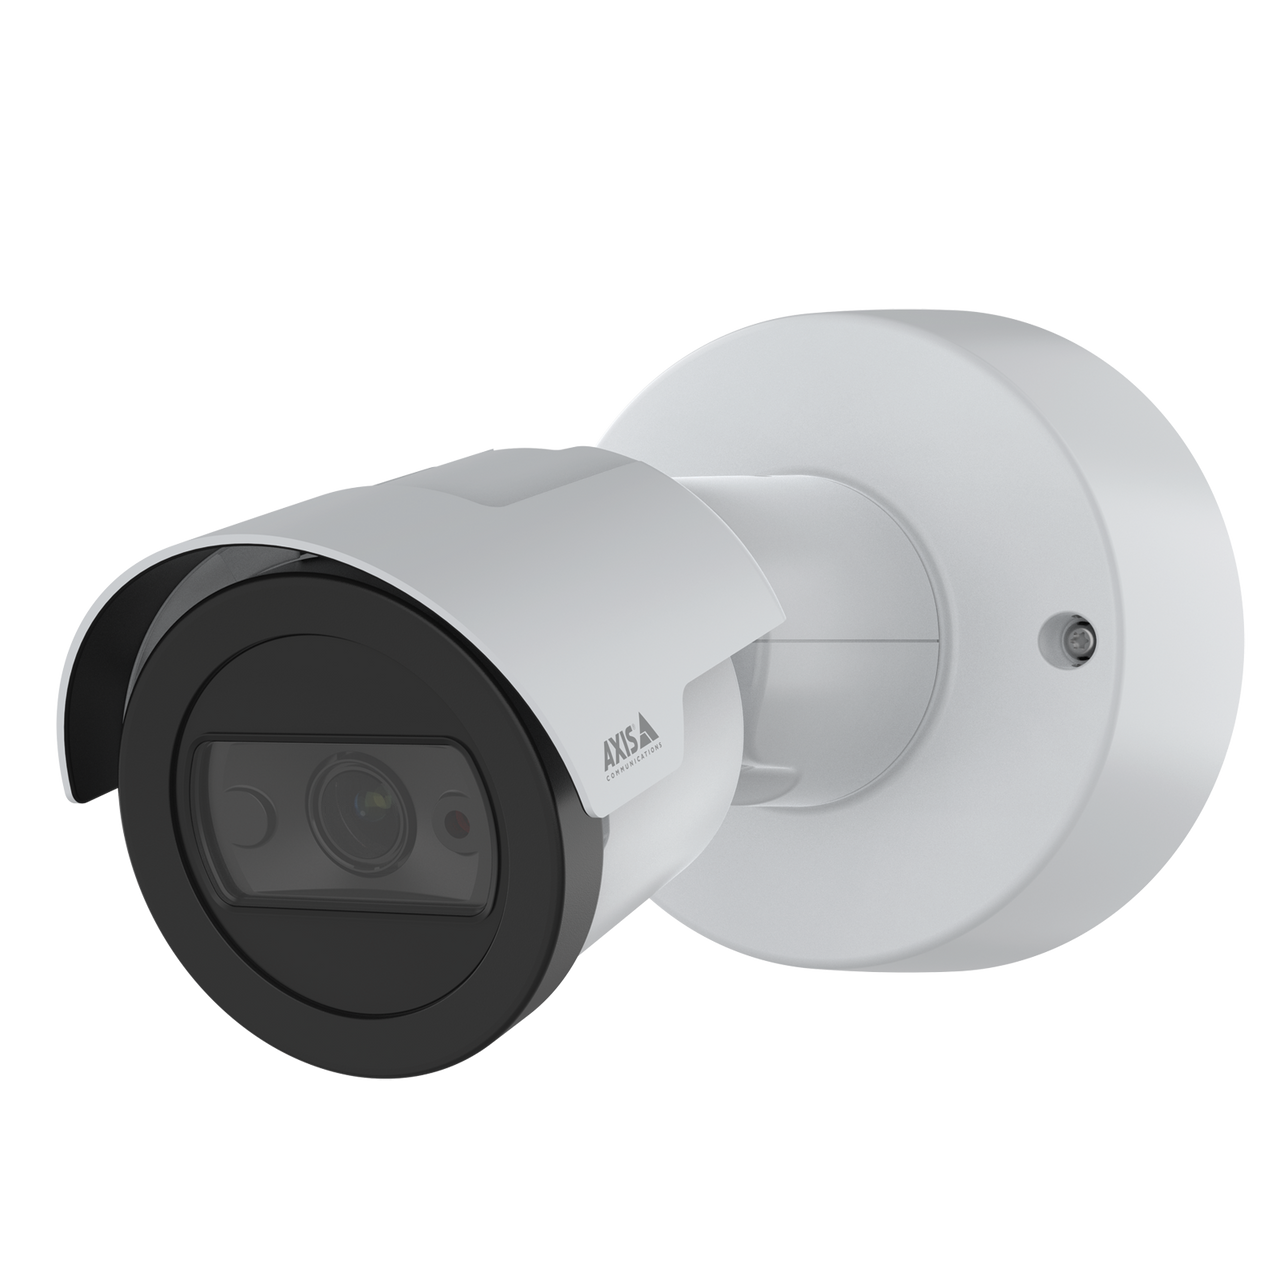 AXIS M2035-LE 2 MP affordable camera with deep learning